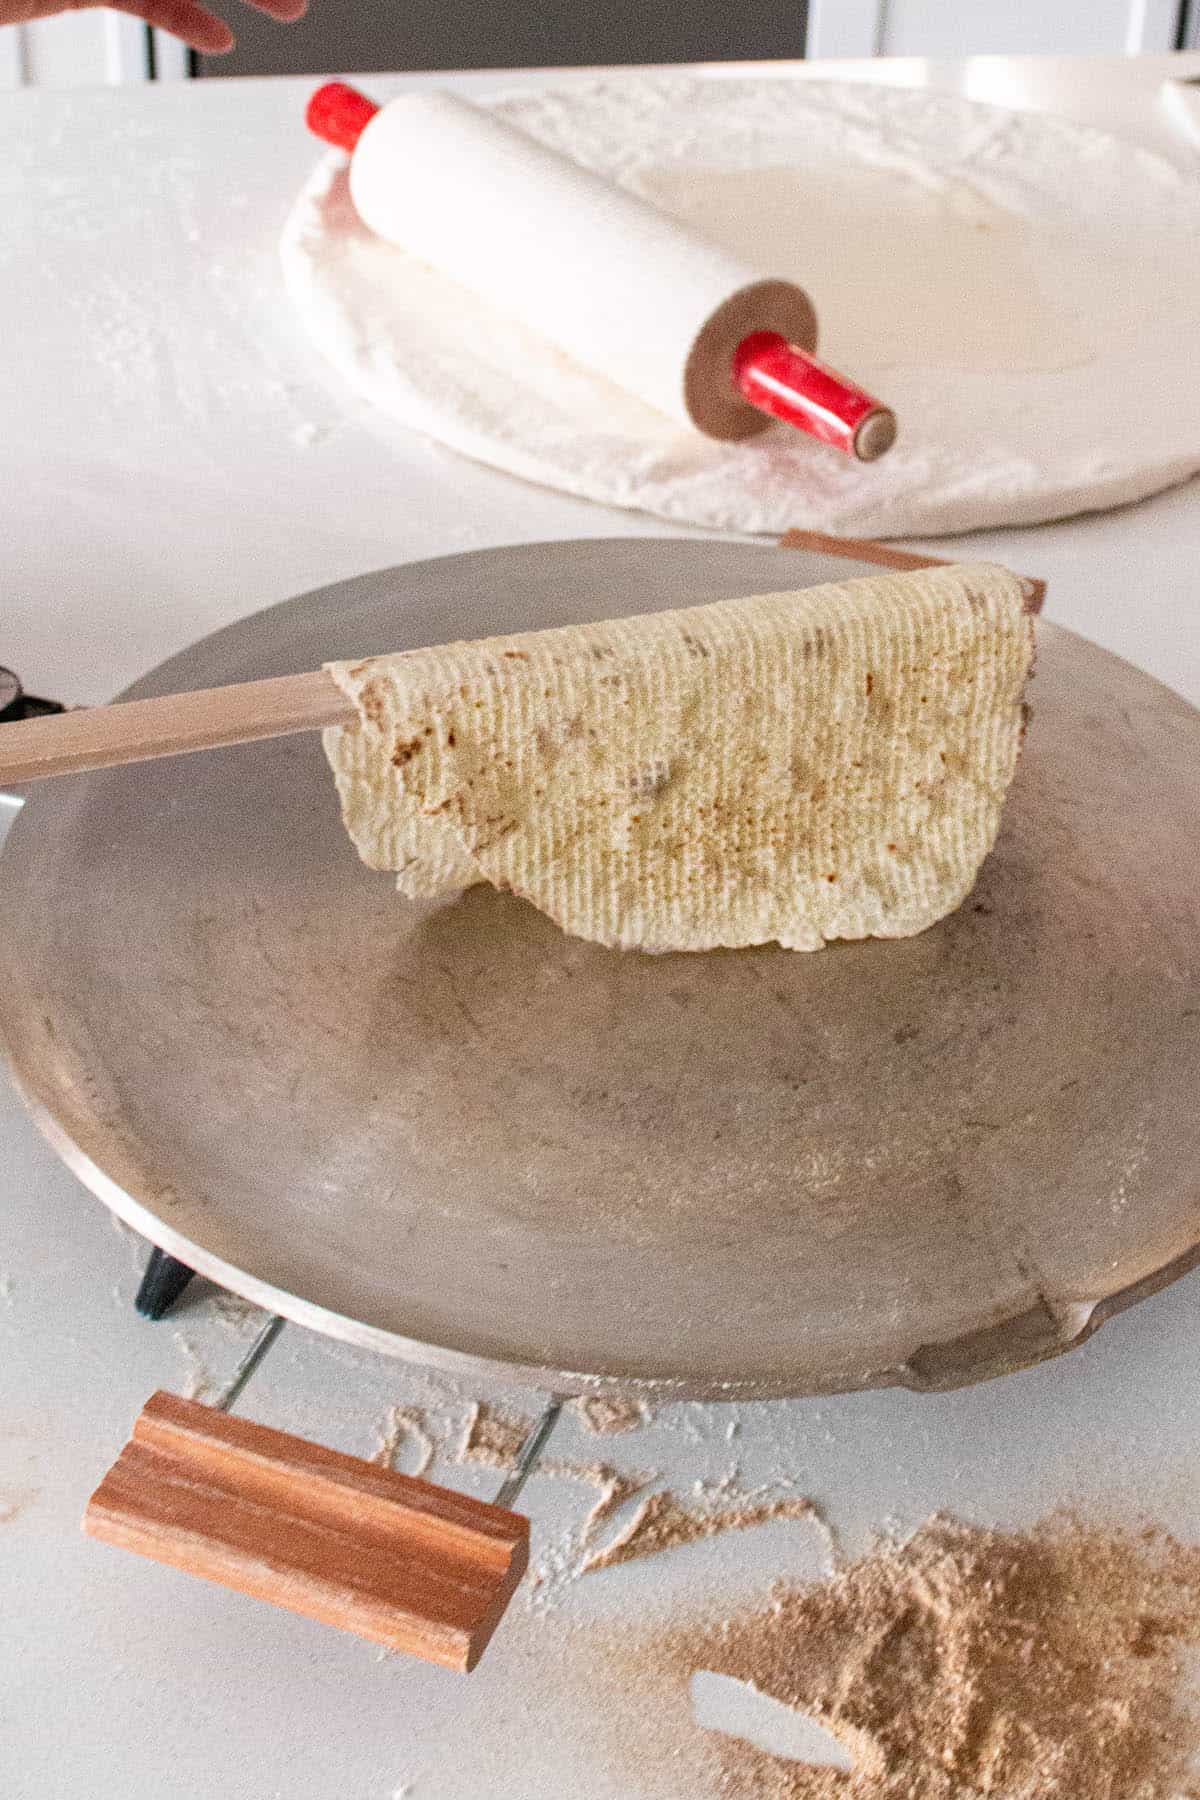 A finished piece of lefse that is golden brown and has dark brown spots.